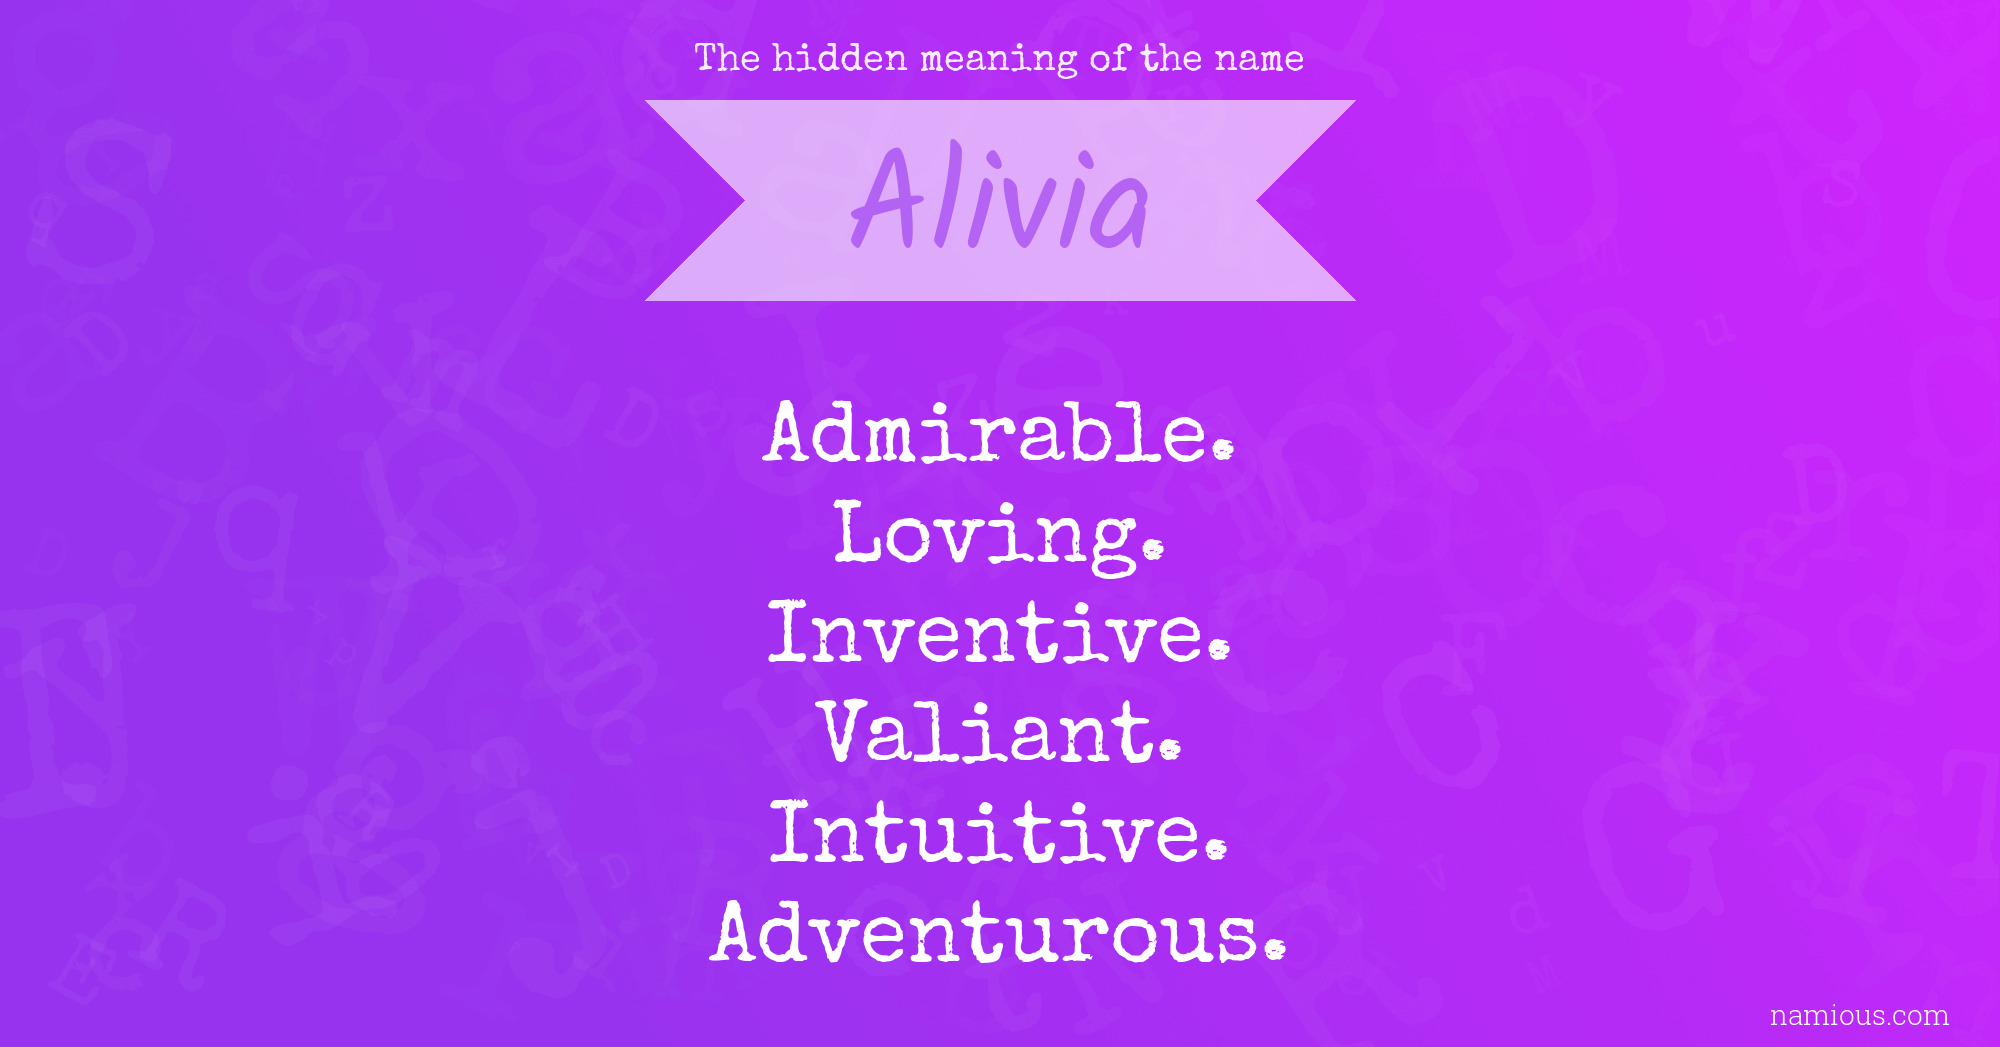 The hidden meaning of the name Alivia